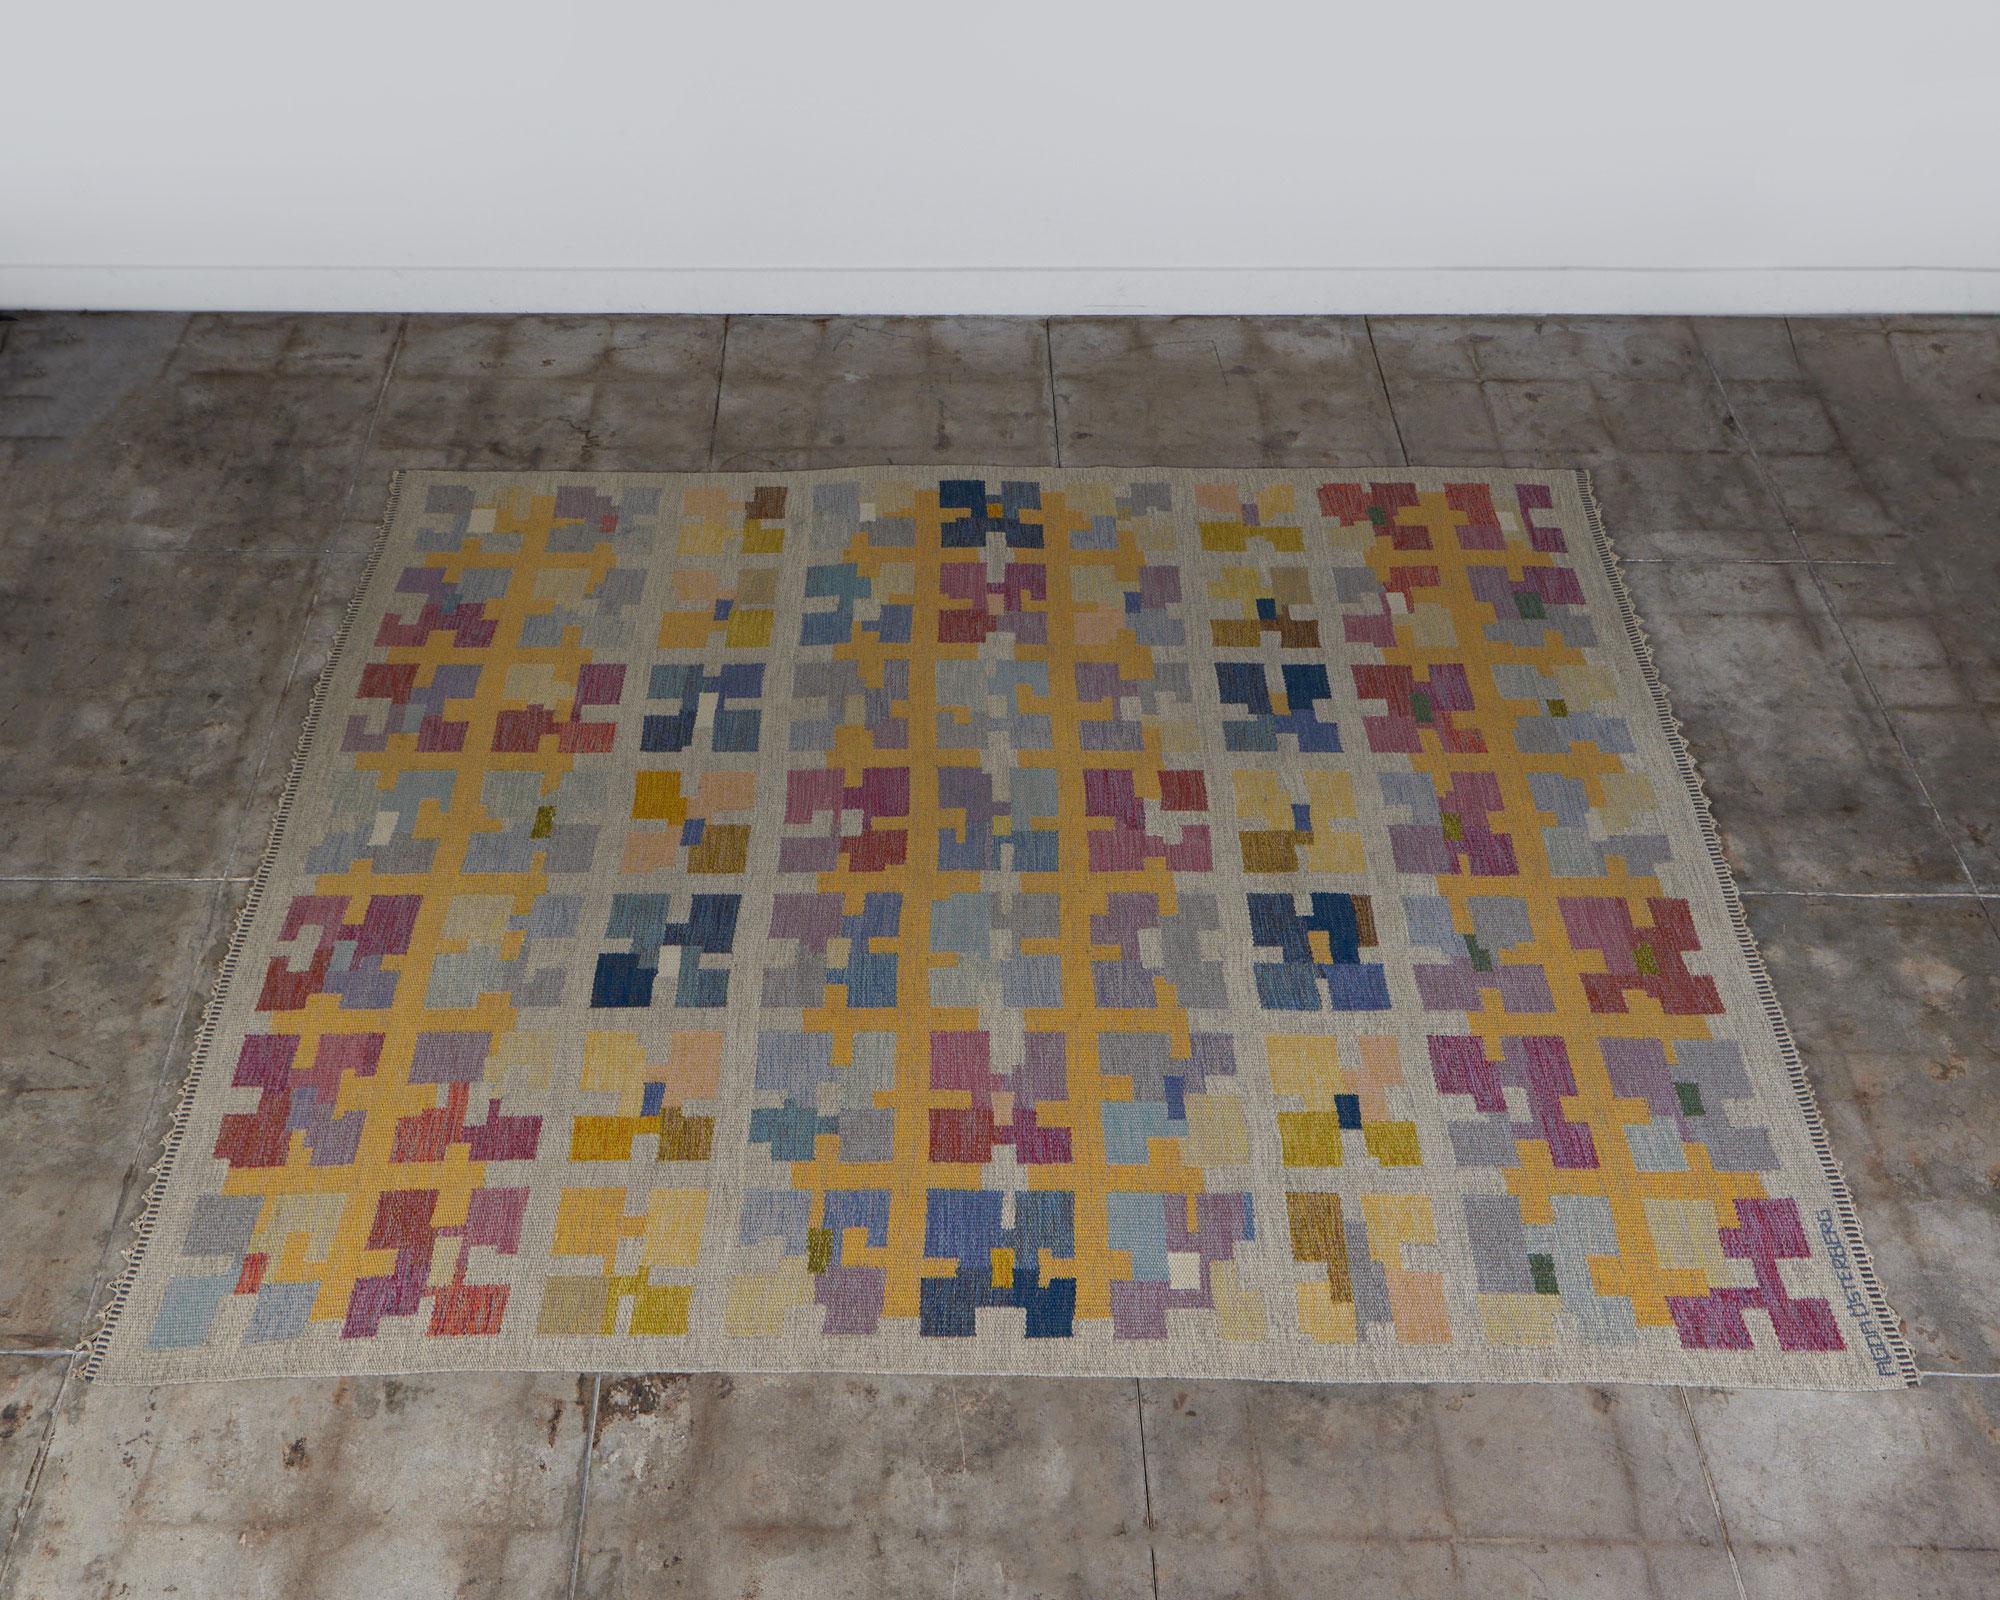 Flat woven rug by Swedish designer Agda Osterberg, c.1950s, Sweden. The abstract square pattern throughout the rug offers a feeling of movement and texture. The muted watercolor tones of yellow, blue and pink lends a softness to the piece. The flat